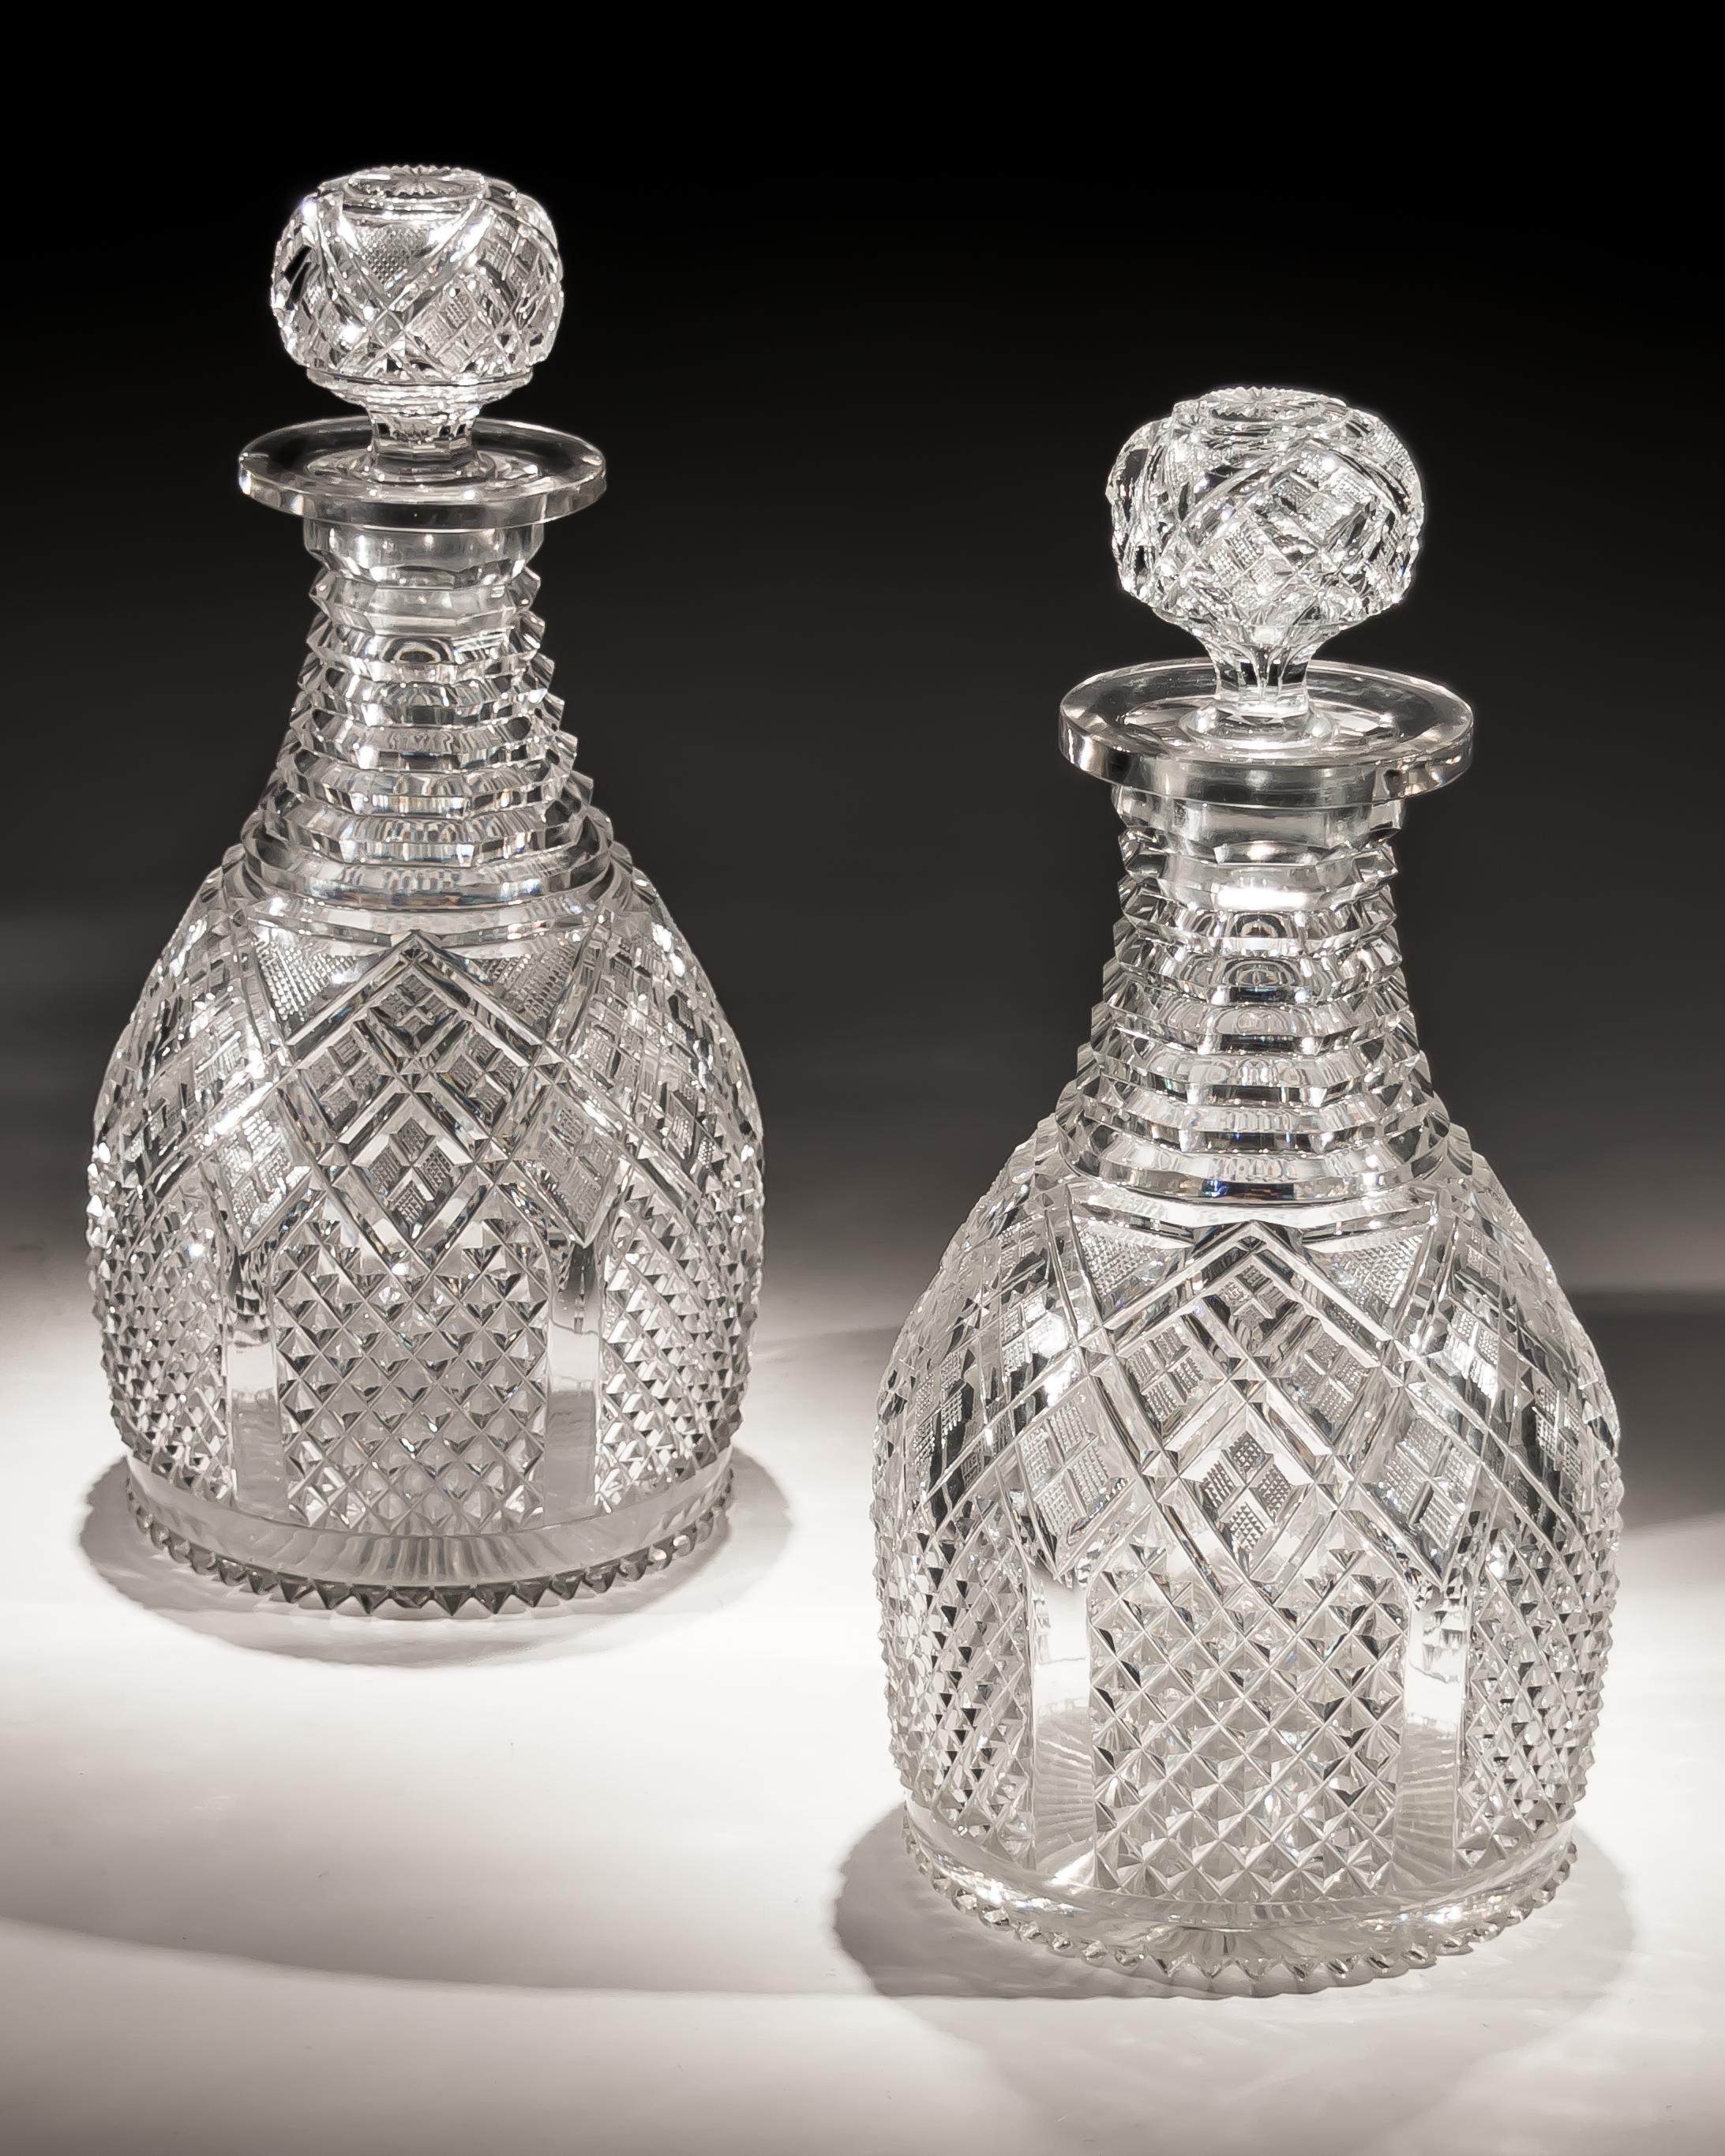 A fine pair of step and diamond panelled cut glass magnum regency decanters.